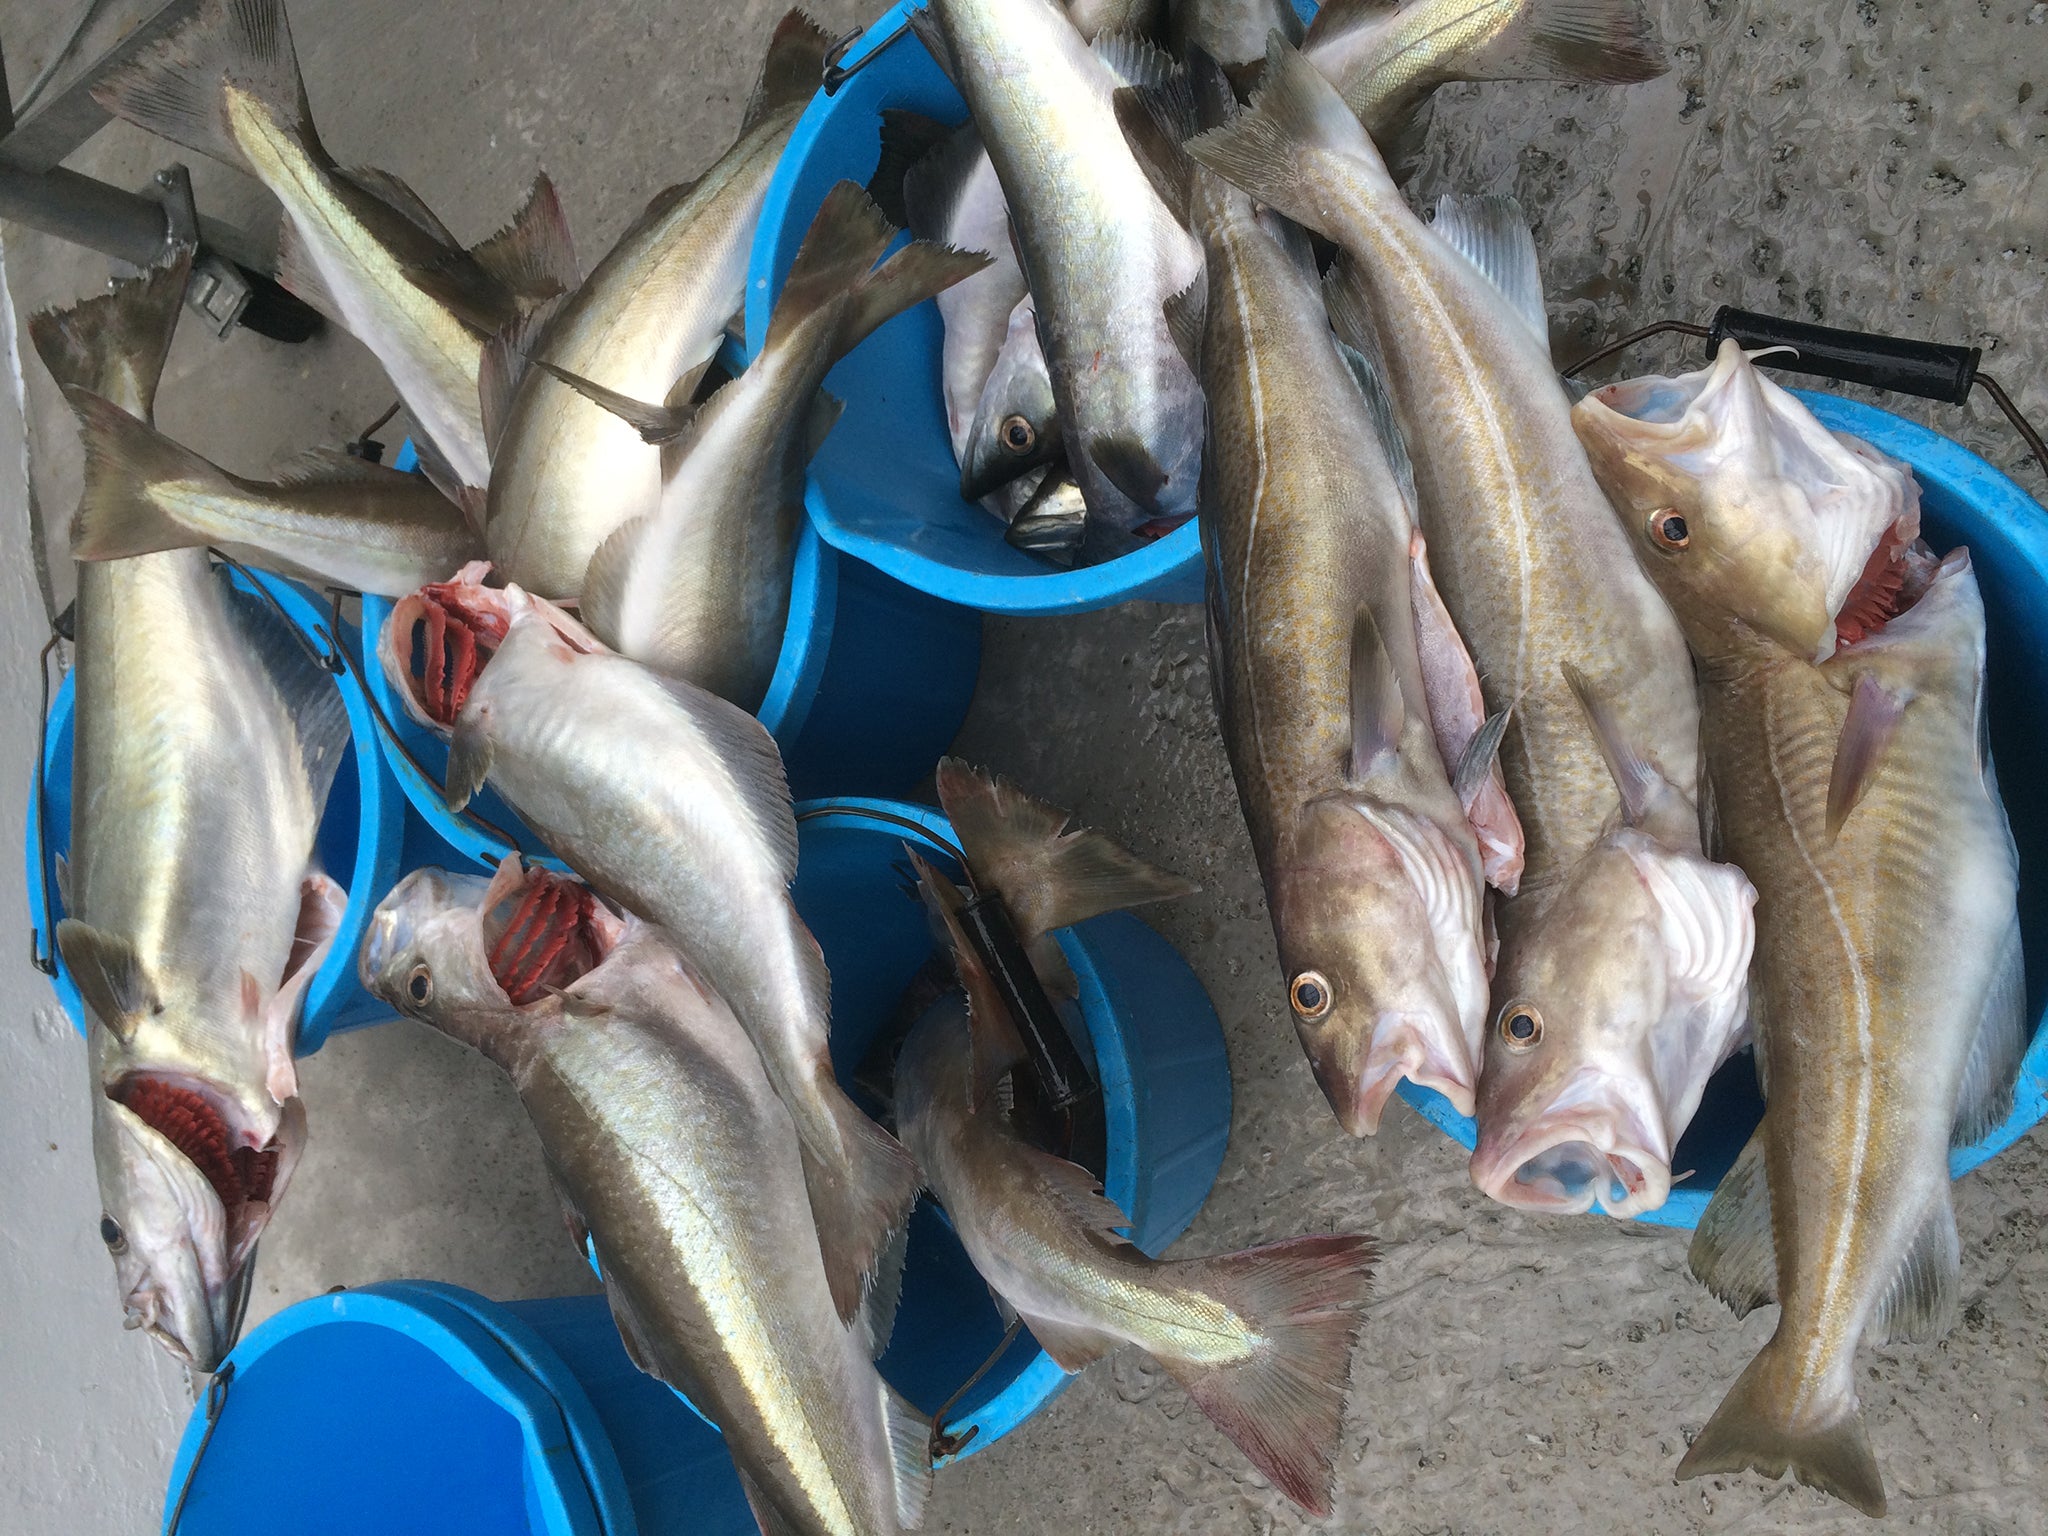 Cod and pollack caught by Kernowsashimi near Coverack Harbour on Cornwall’s Lizard Peninsula